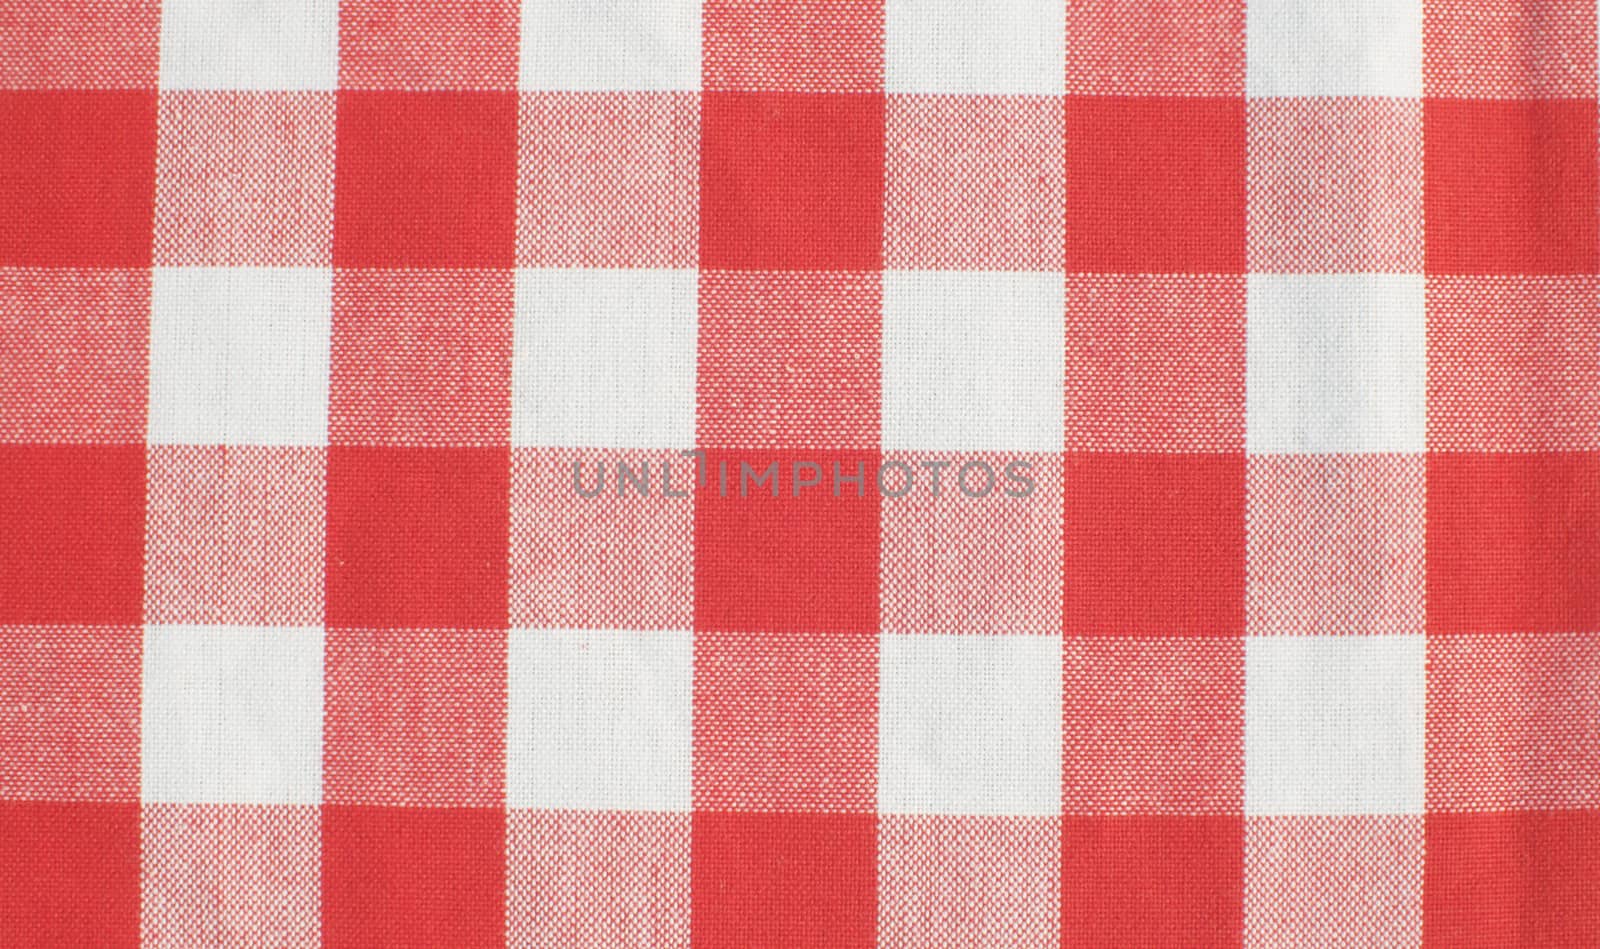 Extreme close up - plaid cotton tablecloth. Texture, textile background. Macro shooting, camera slowly moving along the cloth on slider.